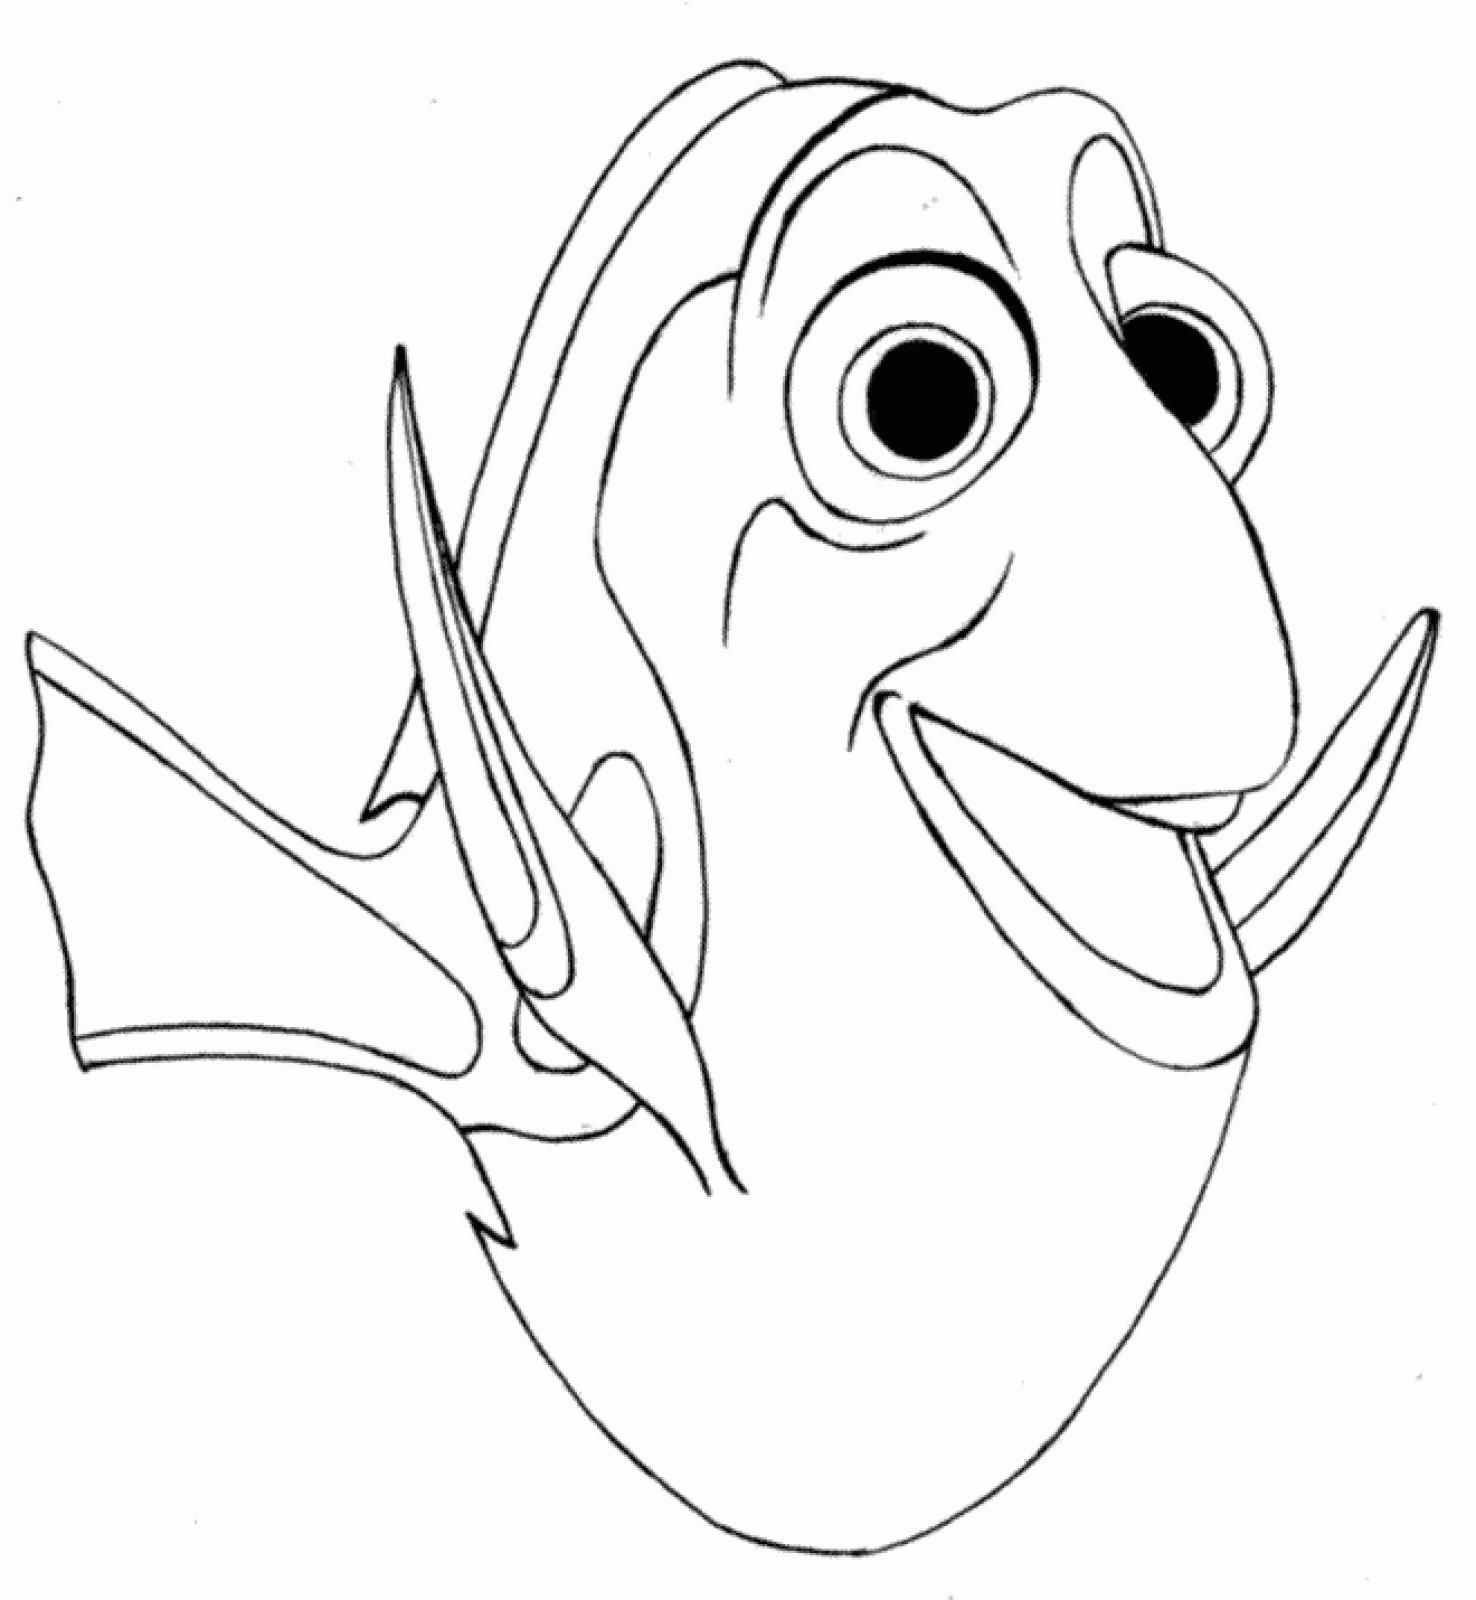 free-finding-nemo-dory-coloring-pages-download-free-finding-nemo-dory